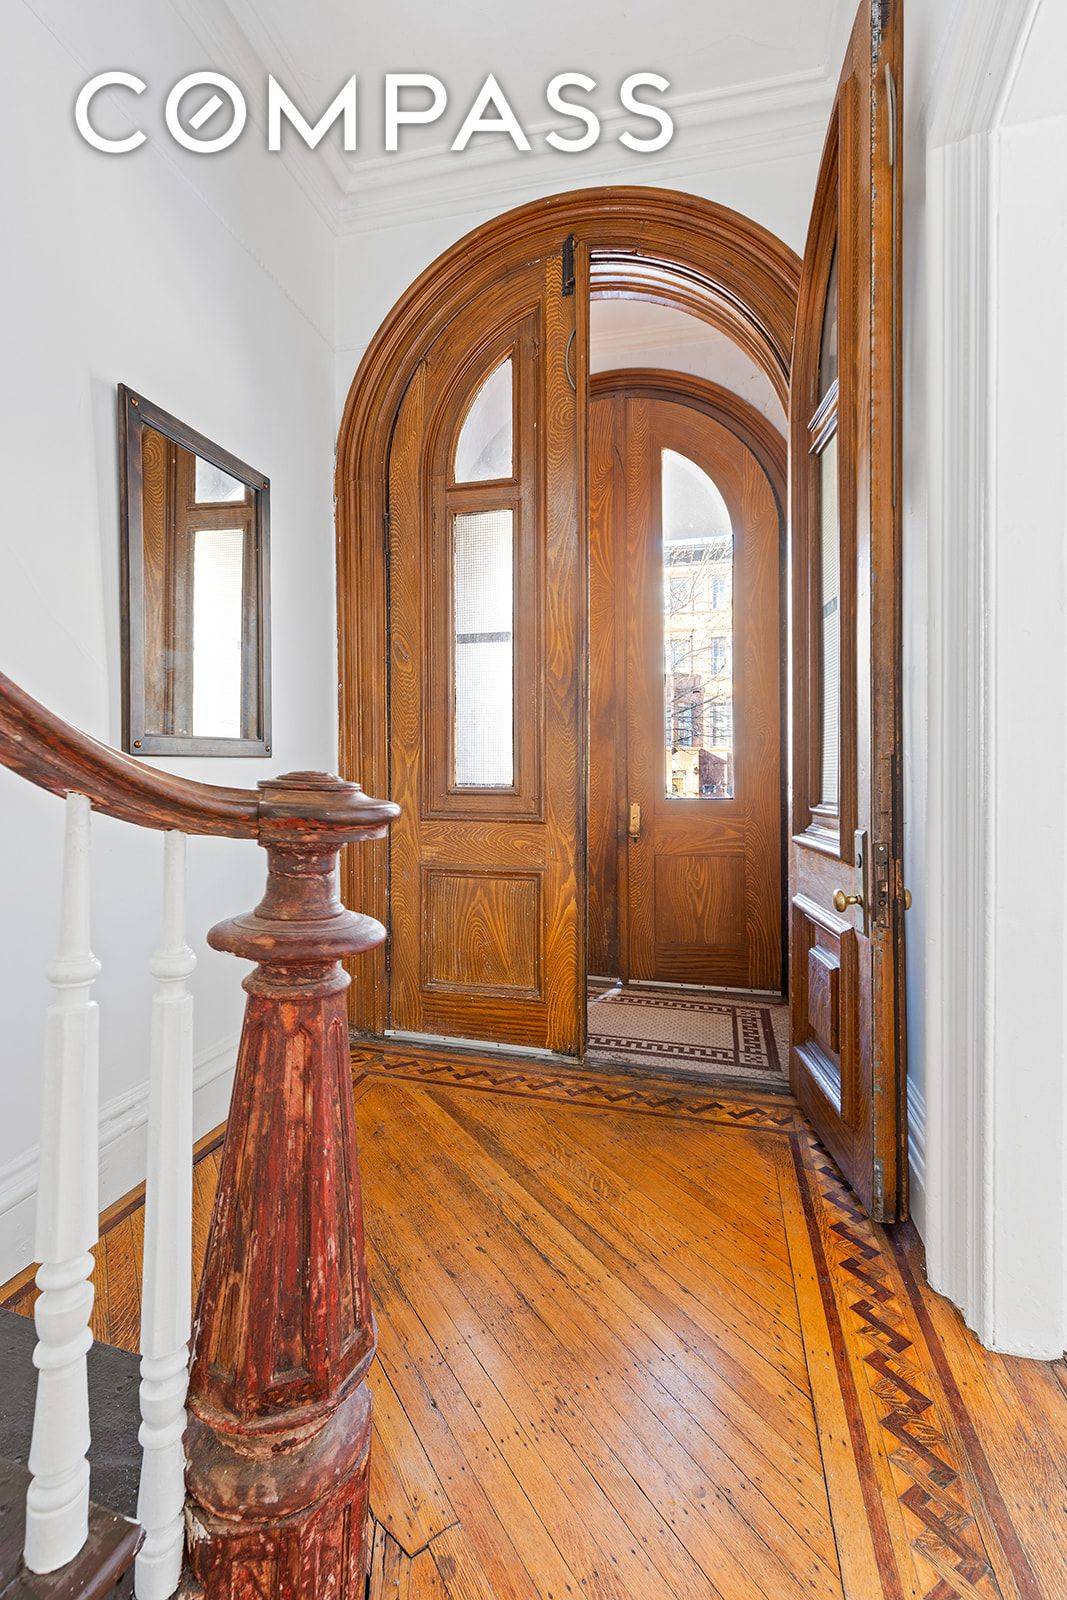 1408 Dean Street is a historic and handsome four story townhouse, situated in Crown Heights North, Brooklyn.